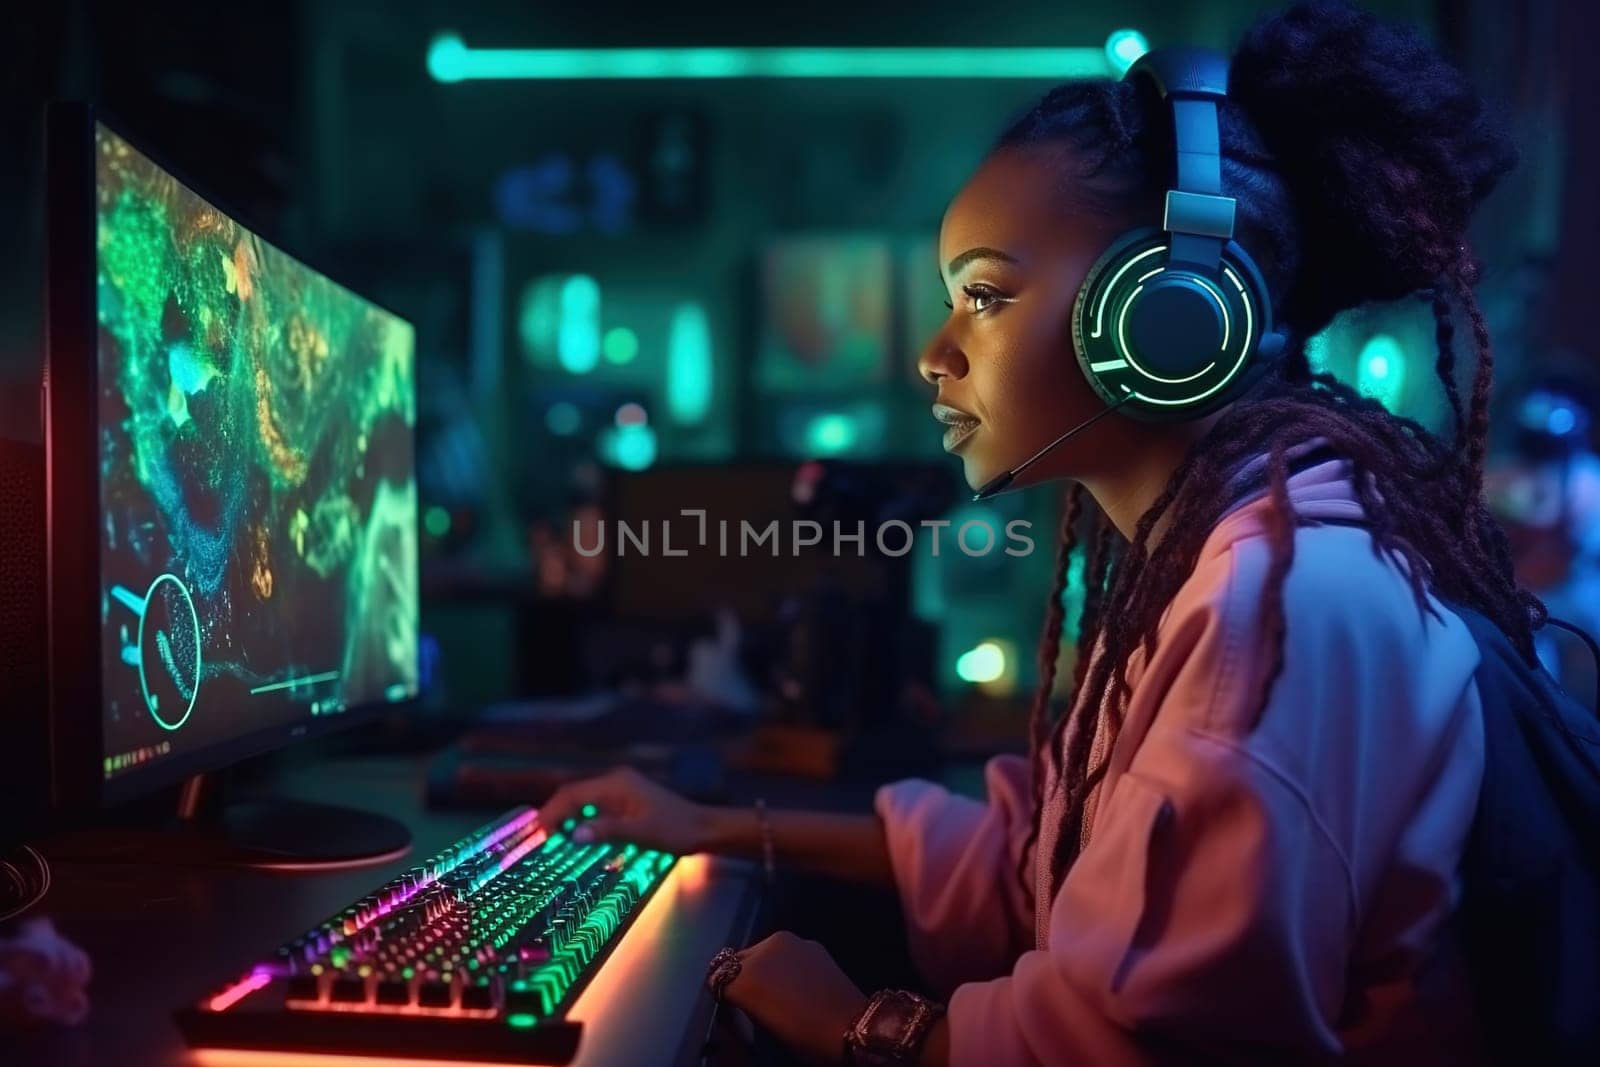 An African-American woman wearing headphones plays games on her computer. Neon light